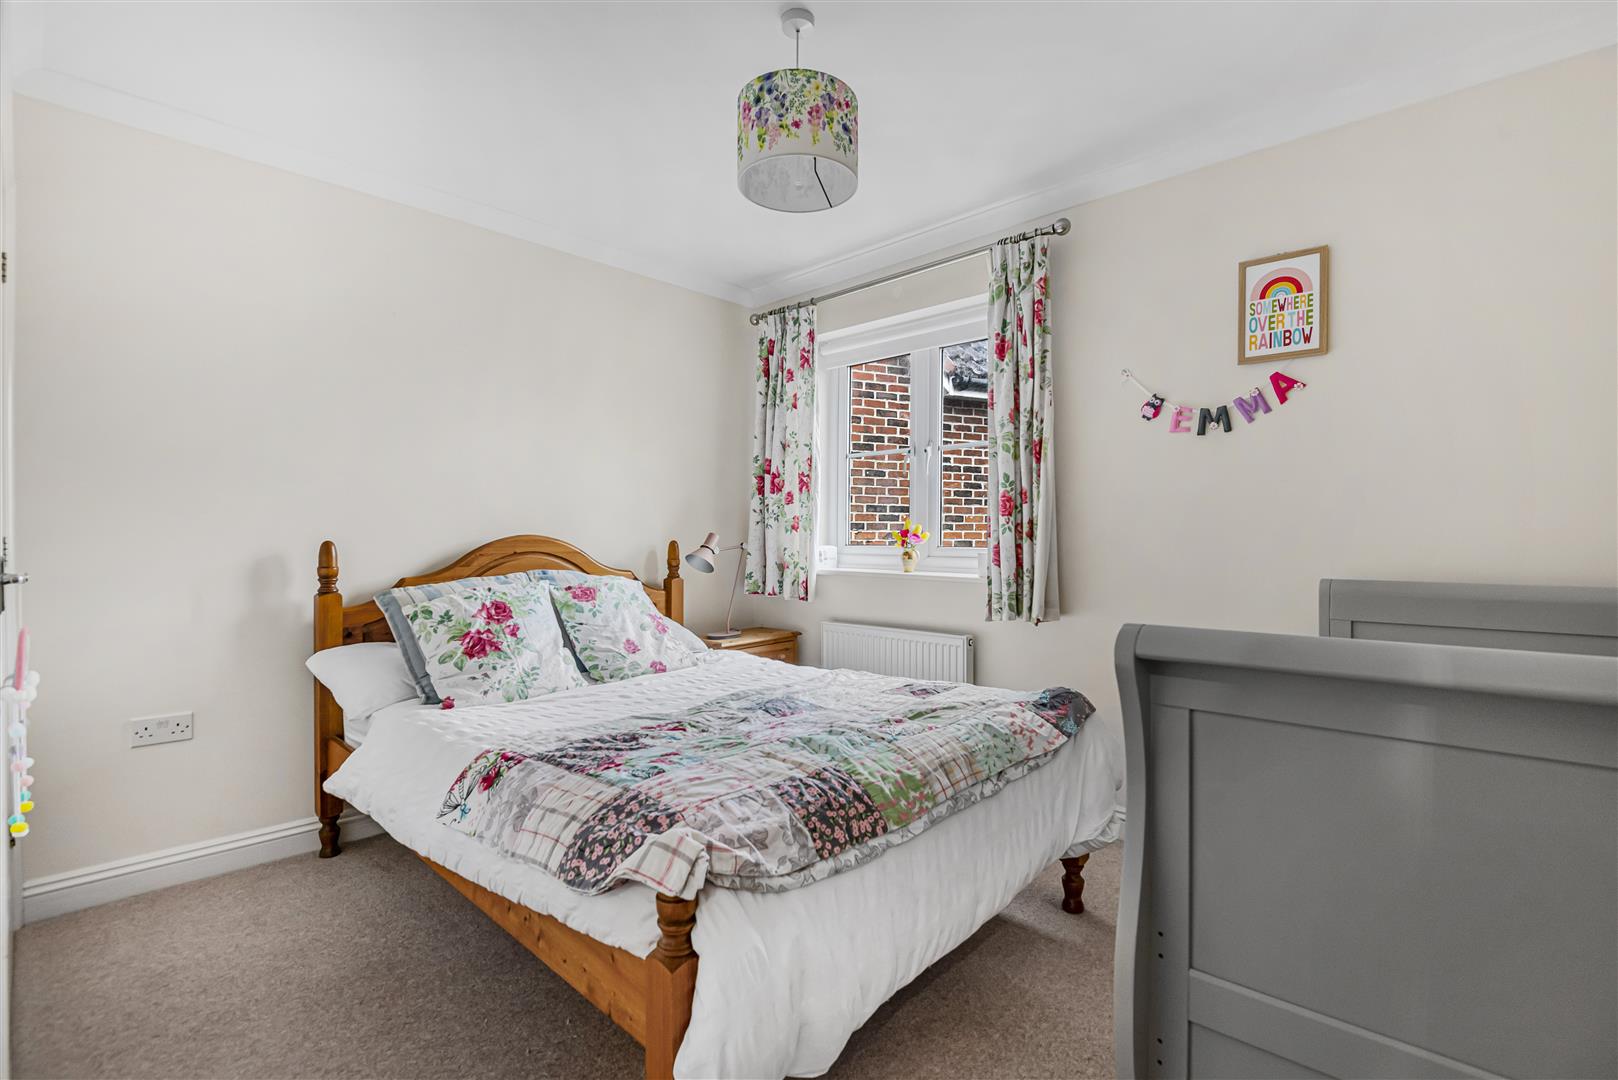 Grove Mews Emmer Green house for sale in Reading